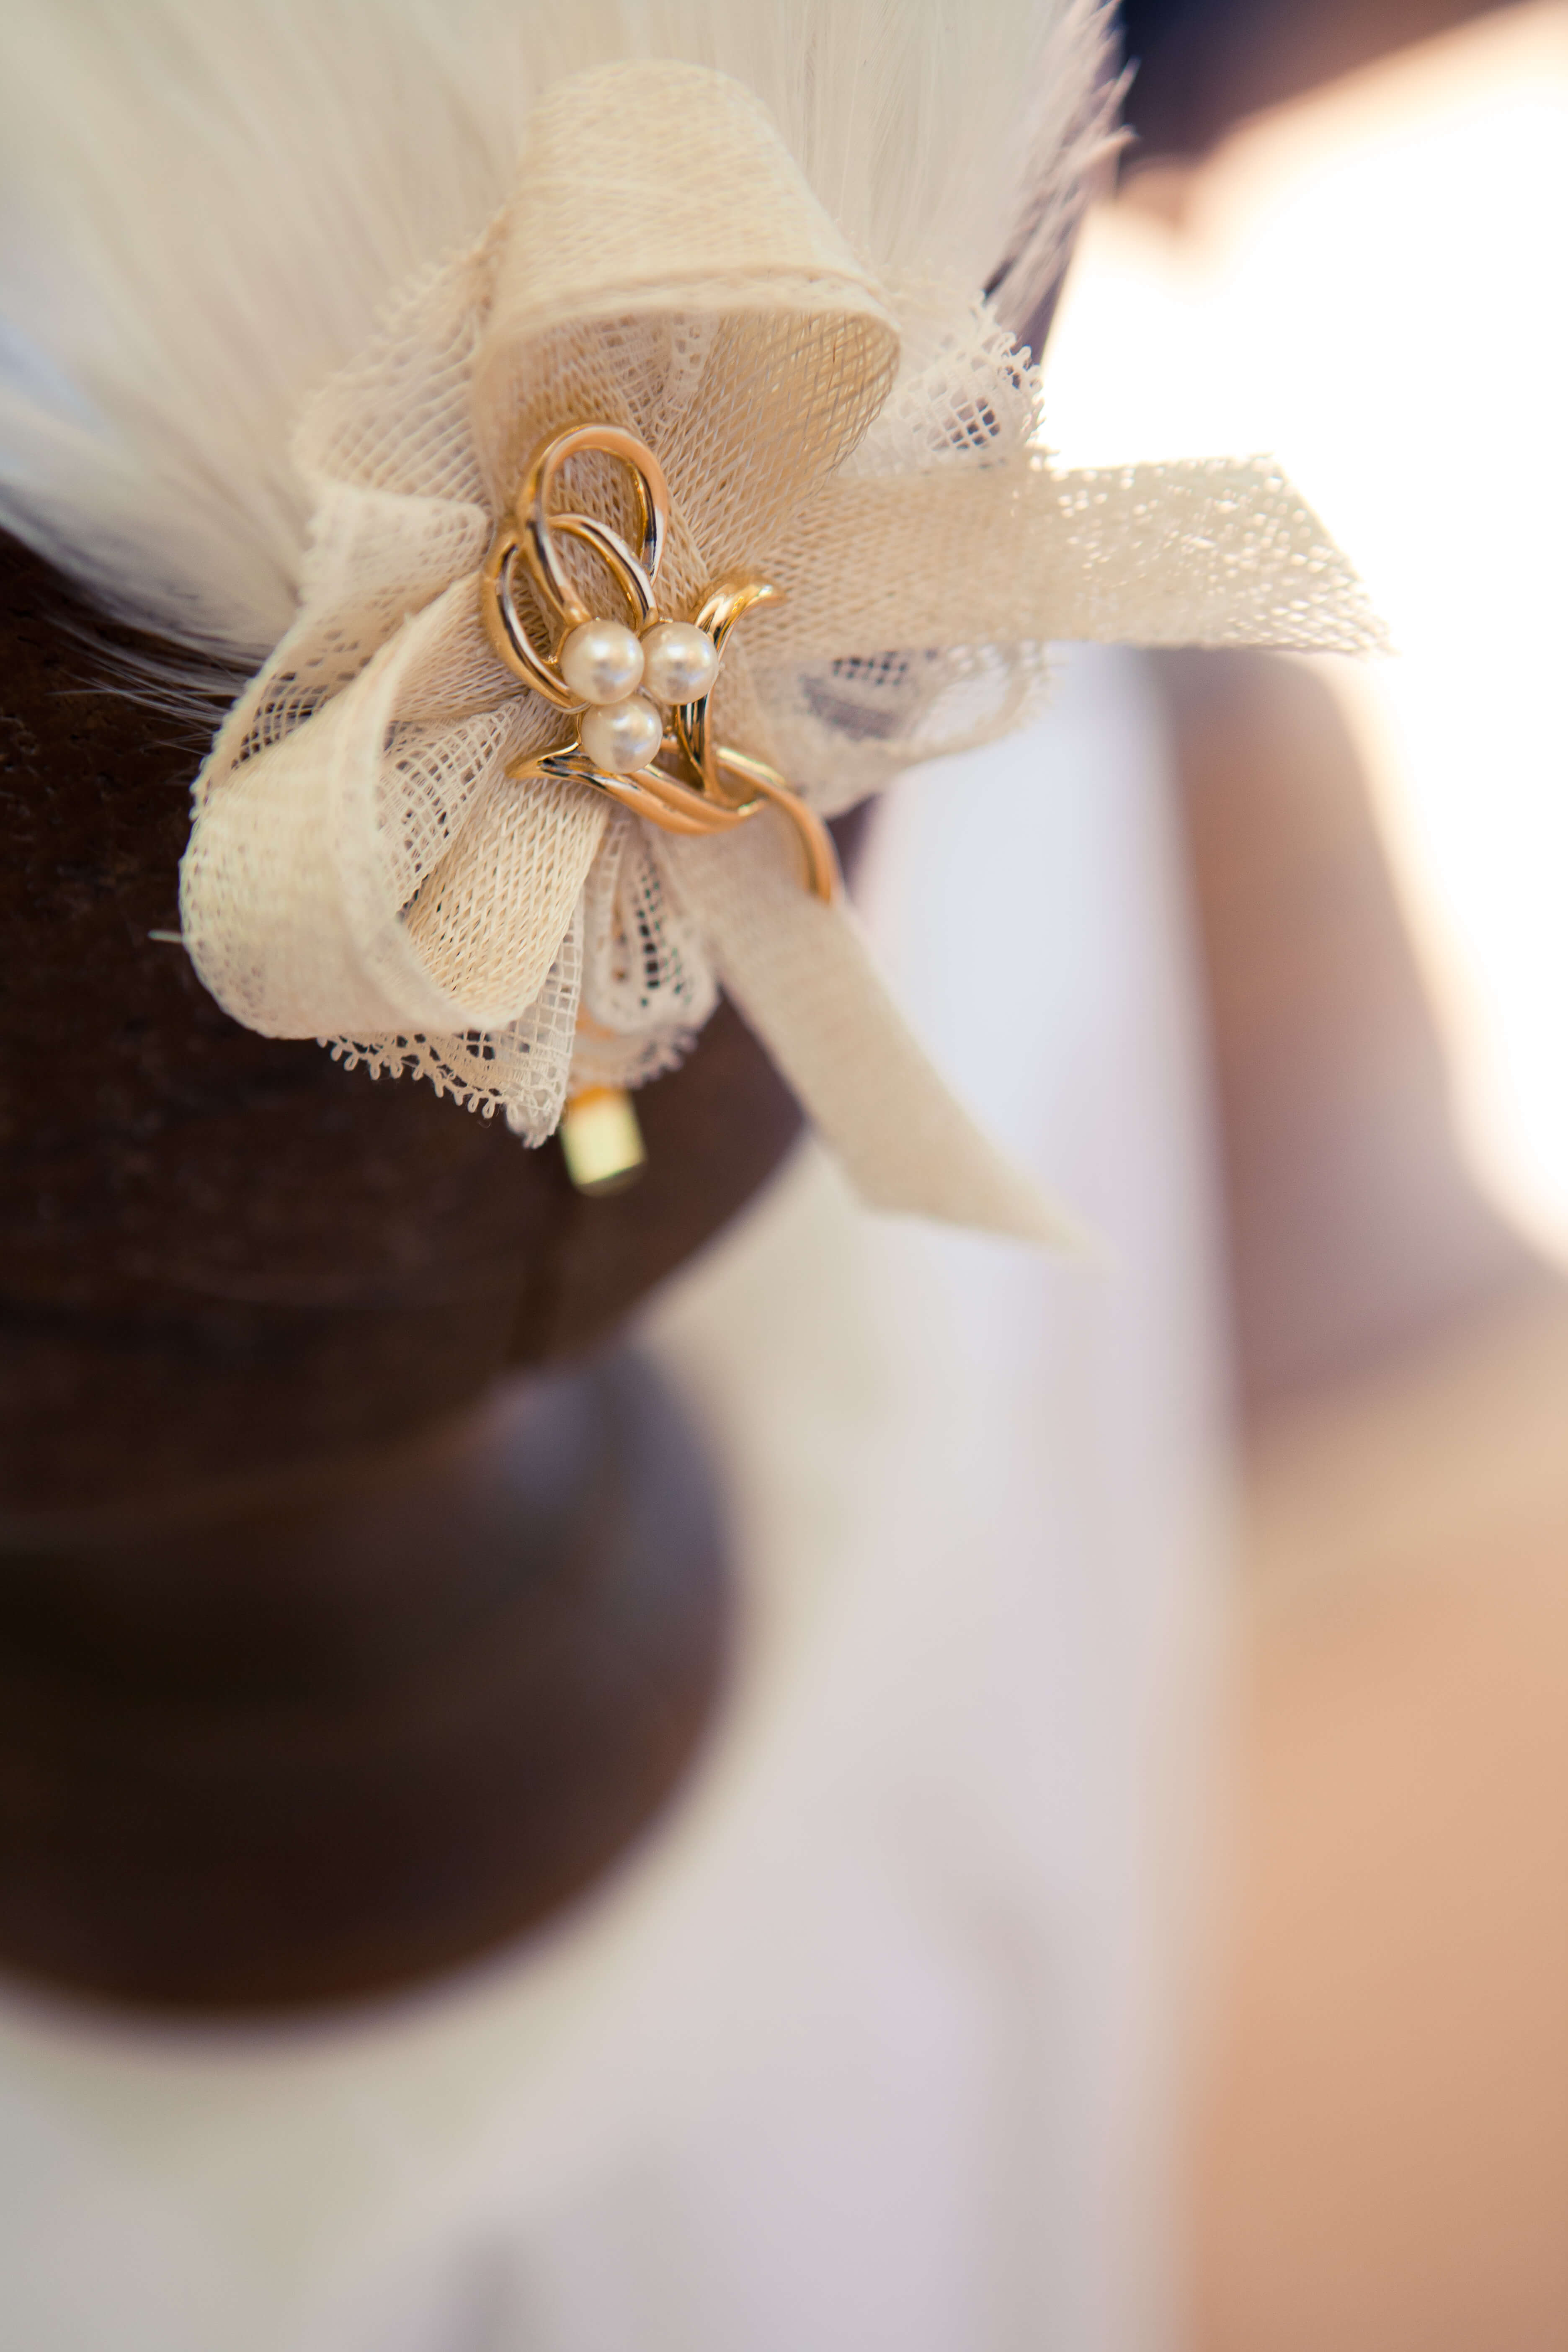 Bespoke hat with a cream bow.